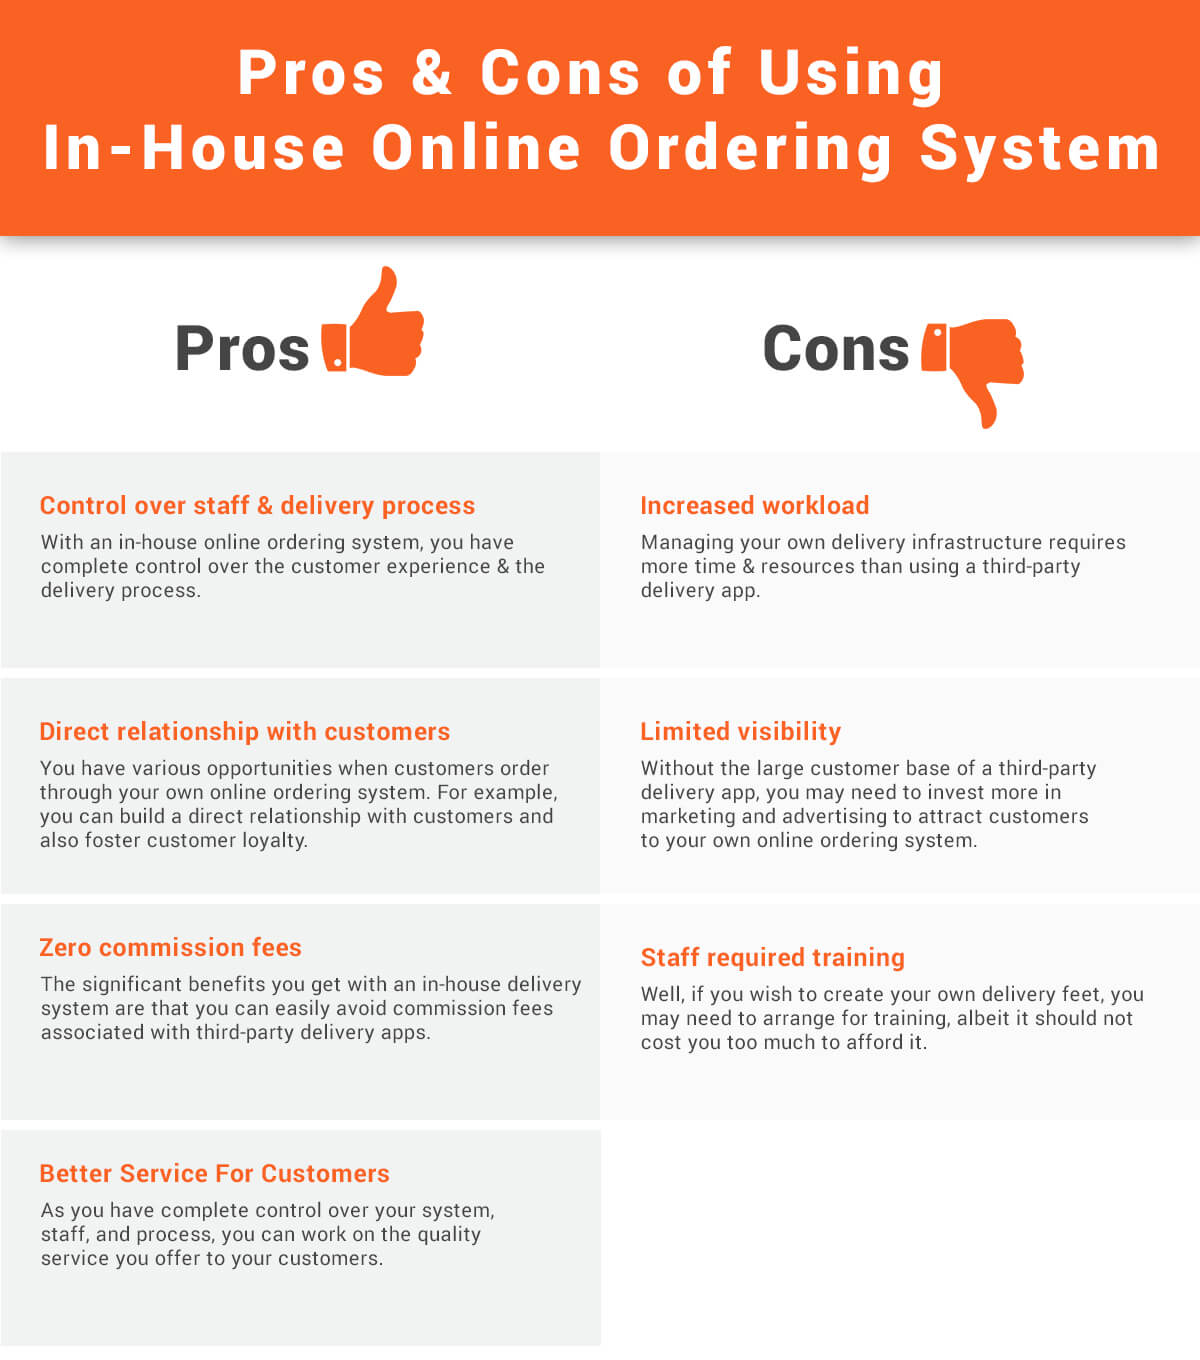 Pros and Cons Using In-House Online Ordering System